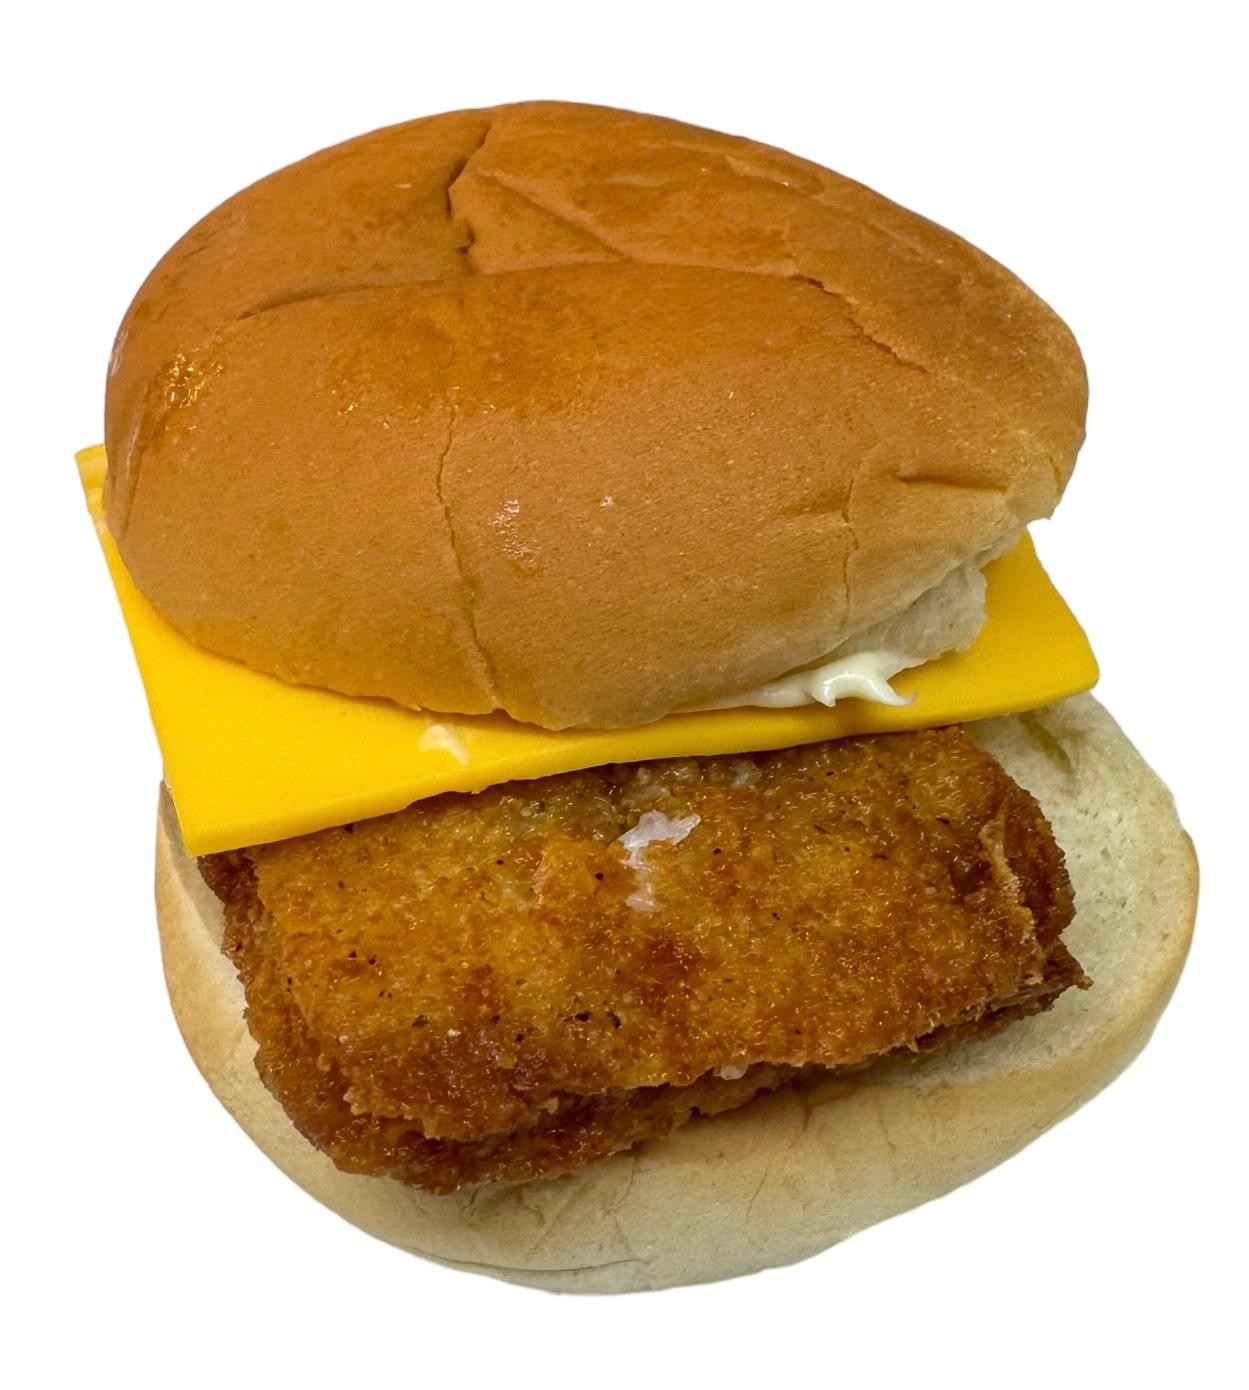 Country Fry Fish on a Bun